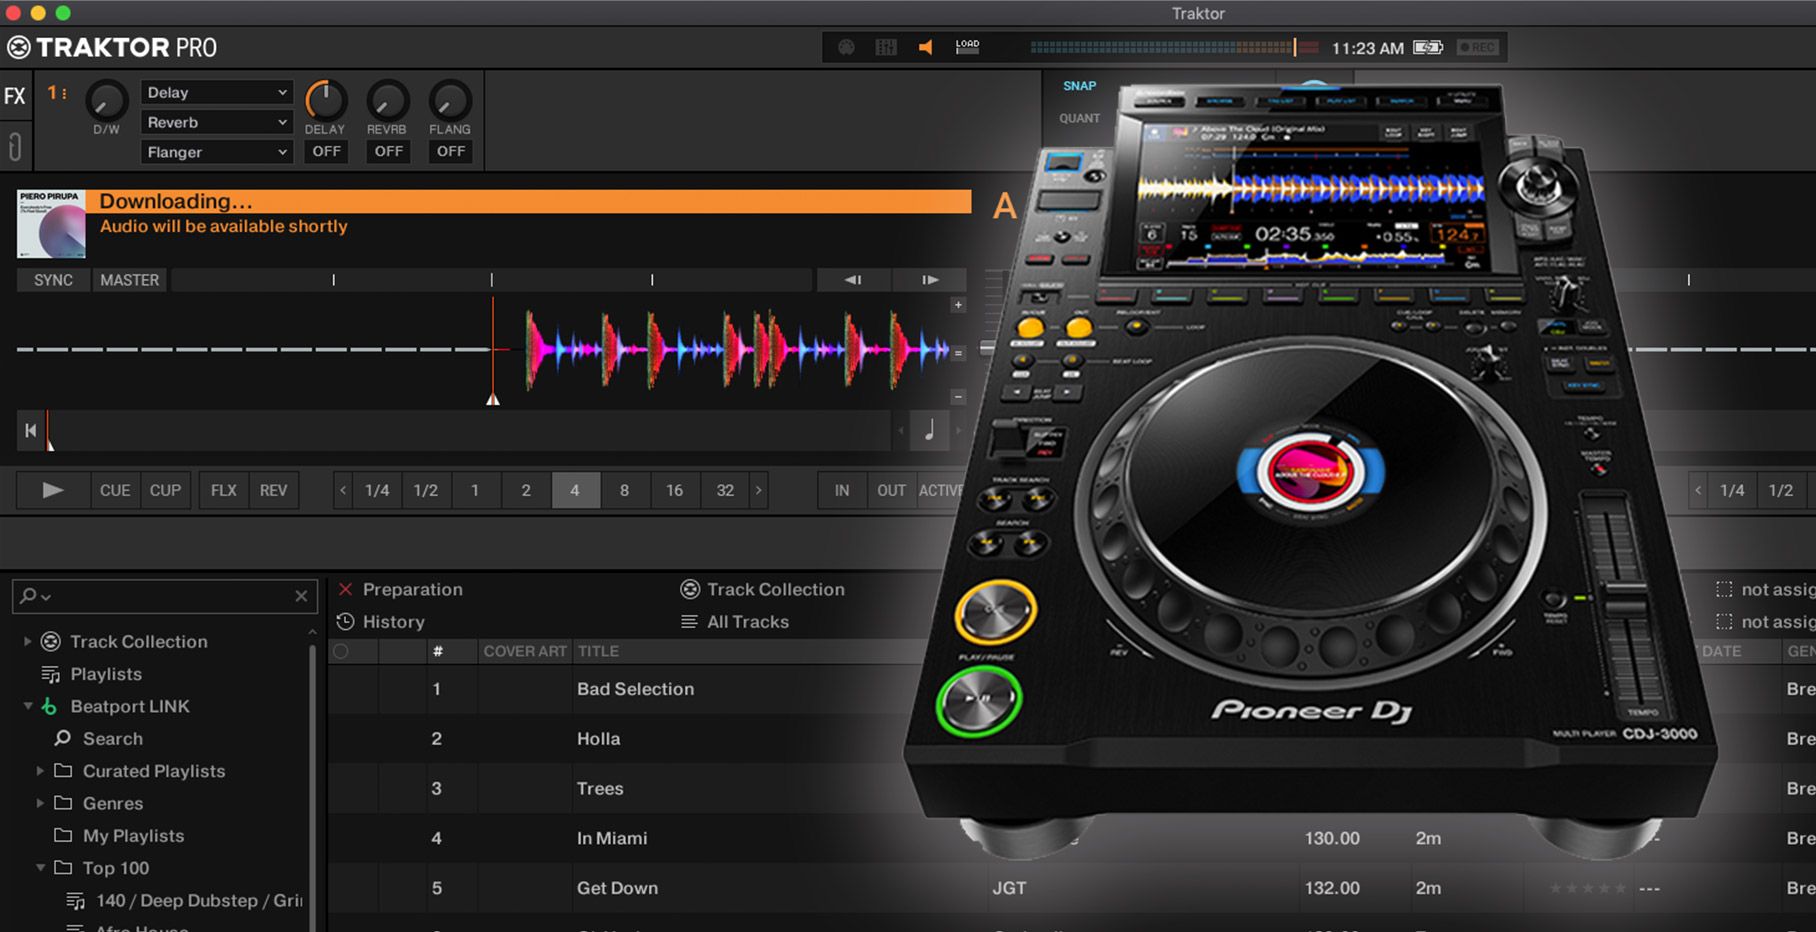 Traktor Pro 3.5 with streaming and CDJ-3000 HID integration